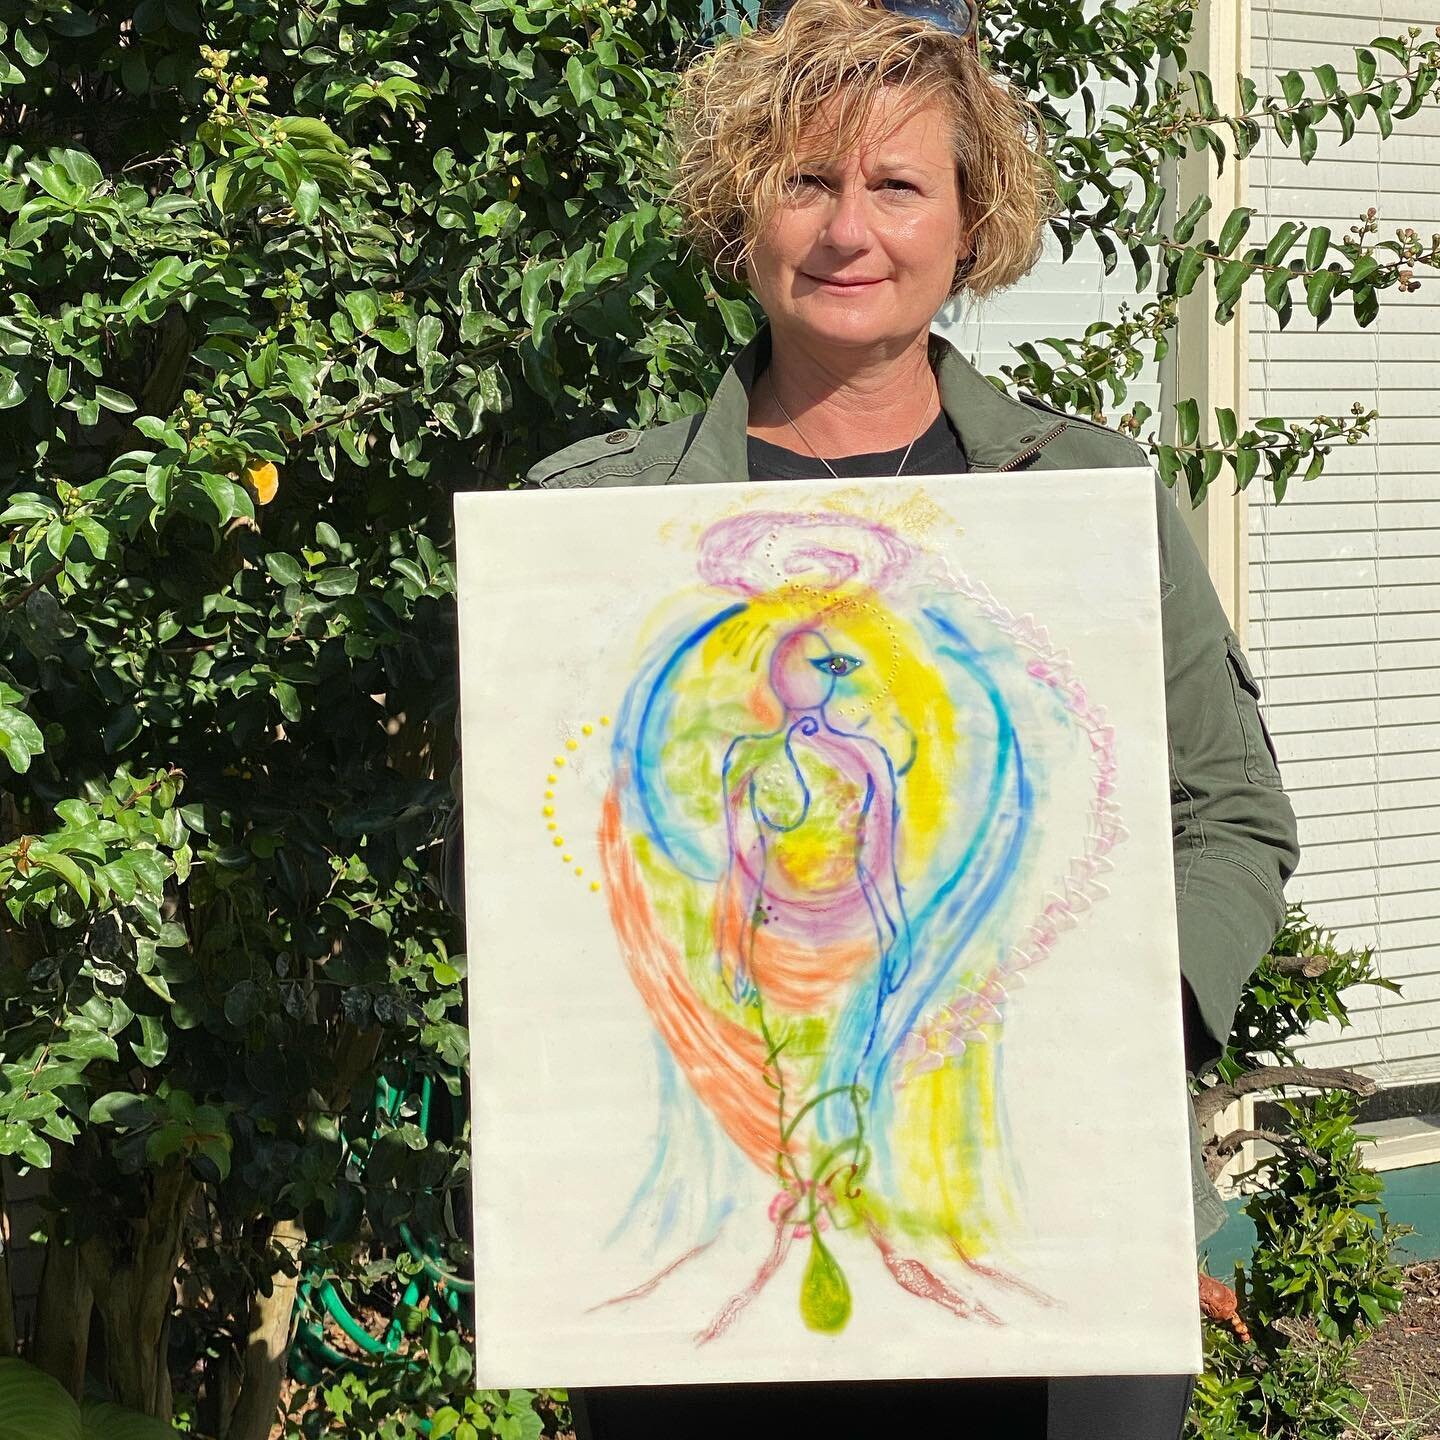 Have your aura portrait painted!  They are beautiful, archival, unique and amazing.
#auraart #auras #auraportrait #crystalhealing #reiki #intuition #intuitivearts